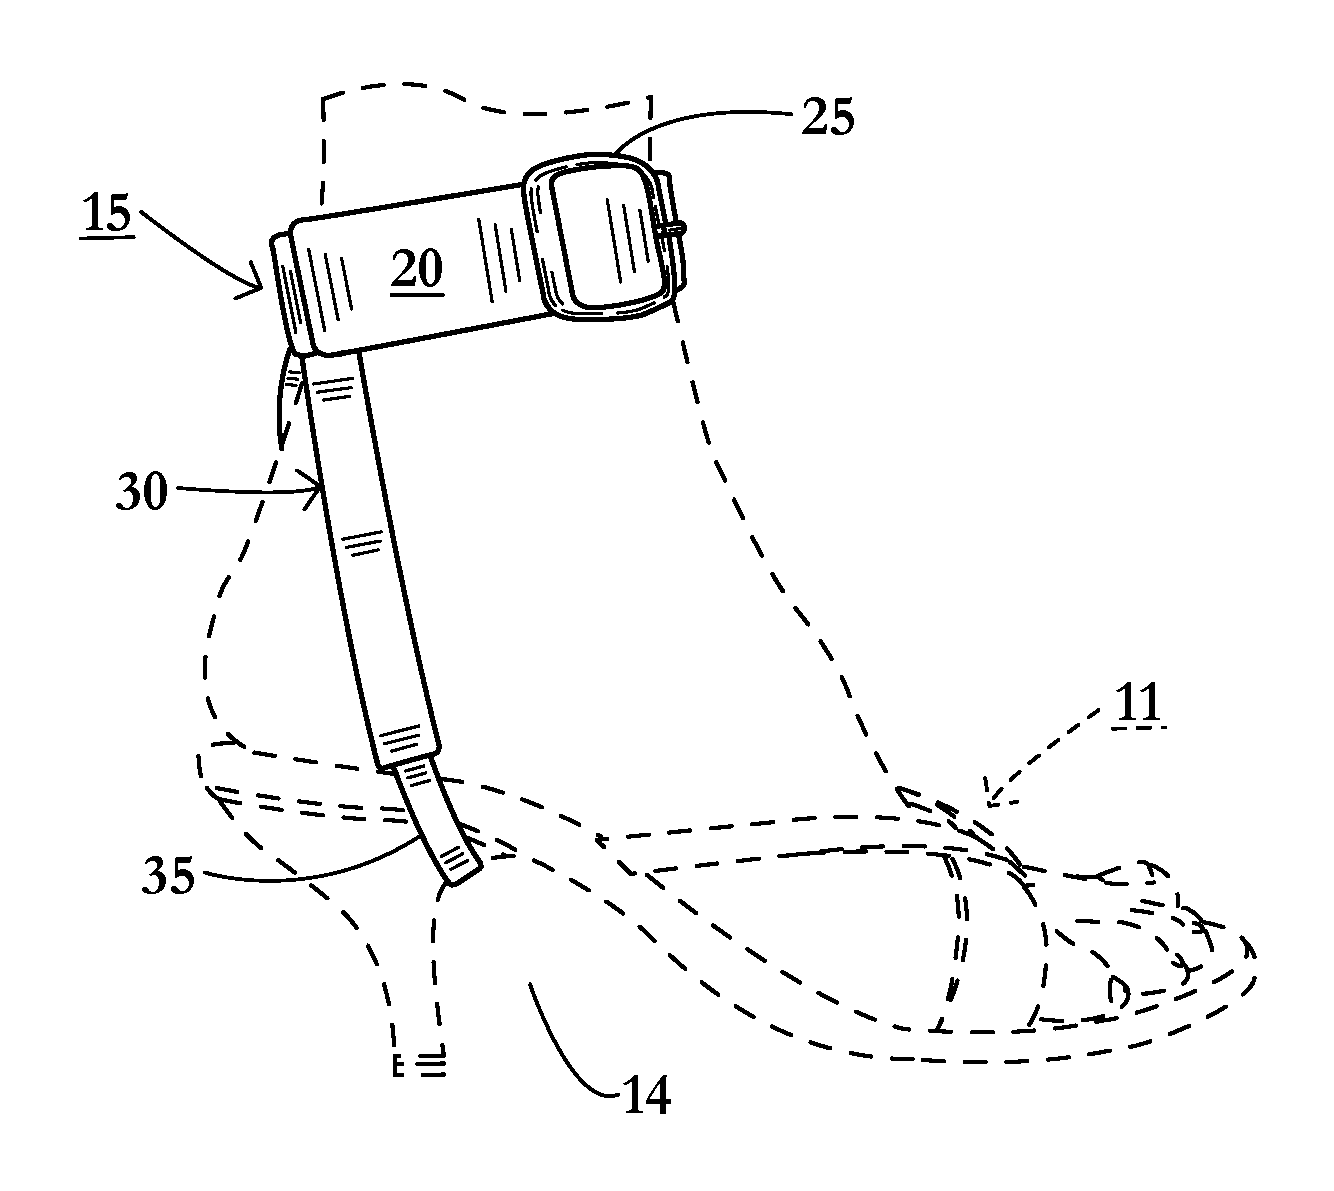 Removable ankle strap system for use with high heeled shoes